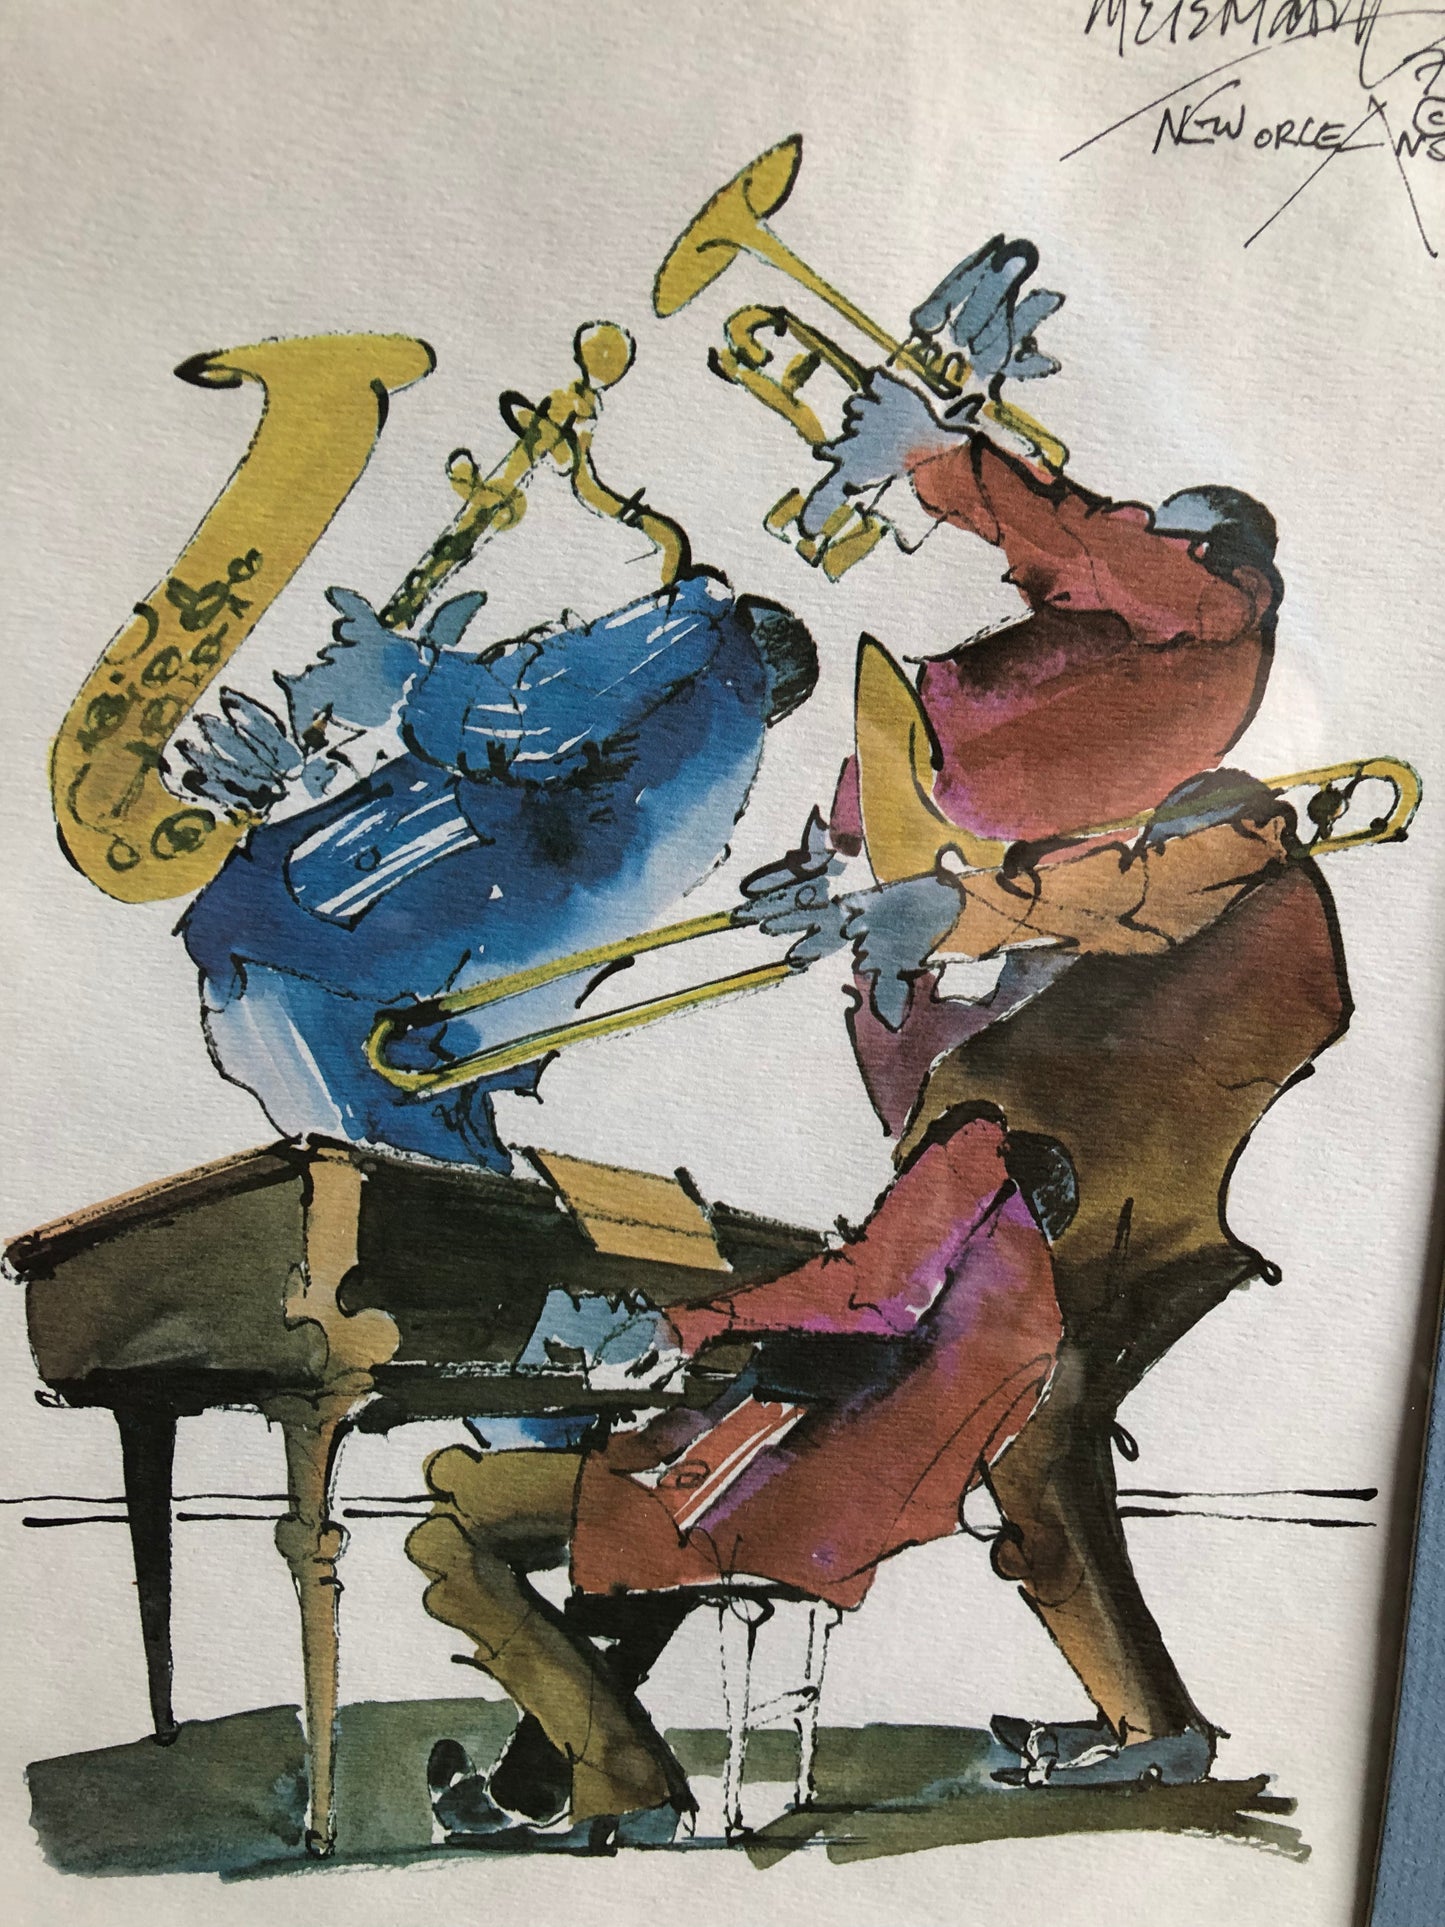 Artist signed Watercolor titled “Jazz Band” by Leo Meiersdorff